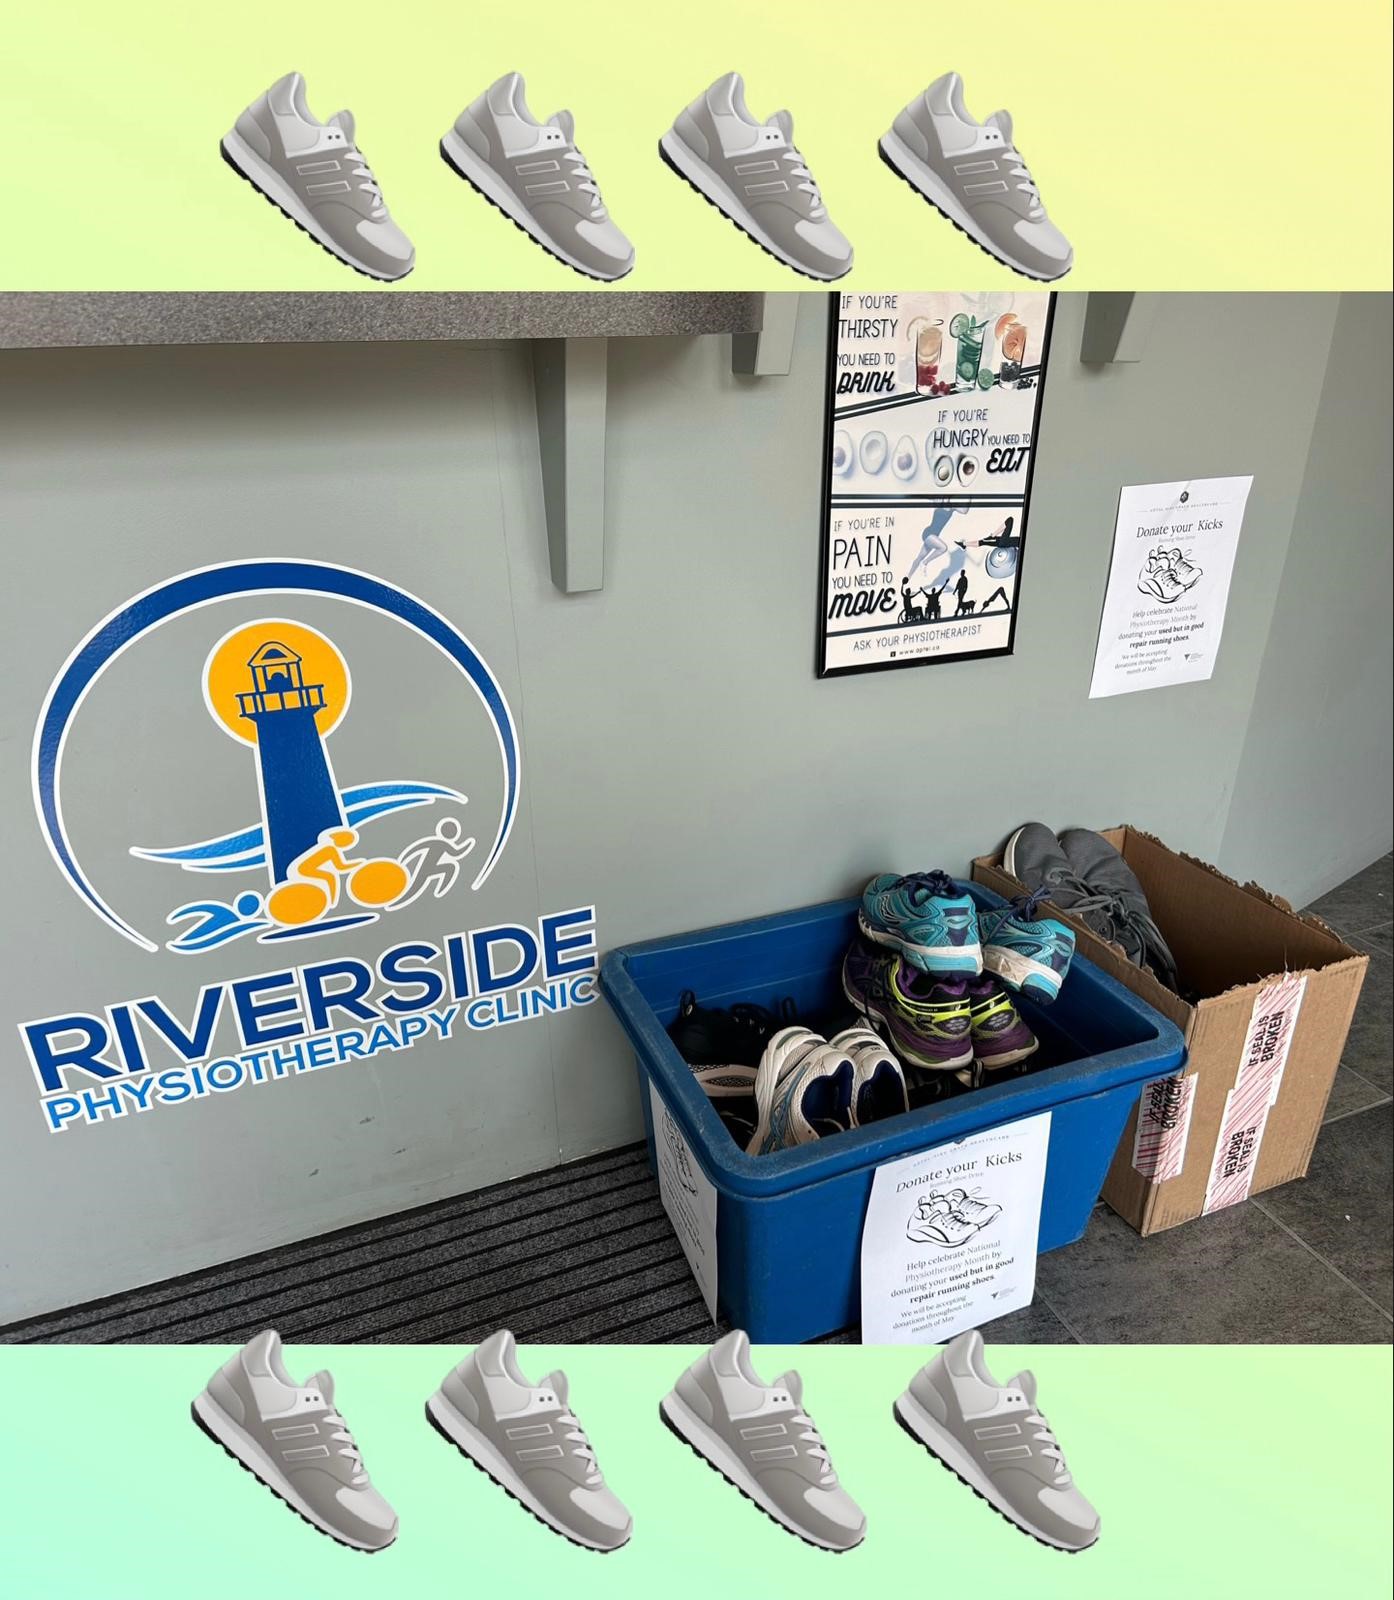 Riverside-Physiotherapy-Donate-Kicks-Campaign